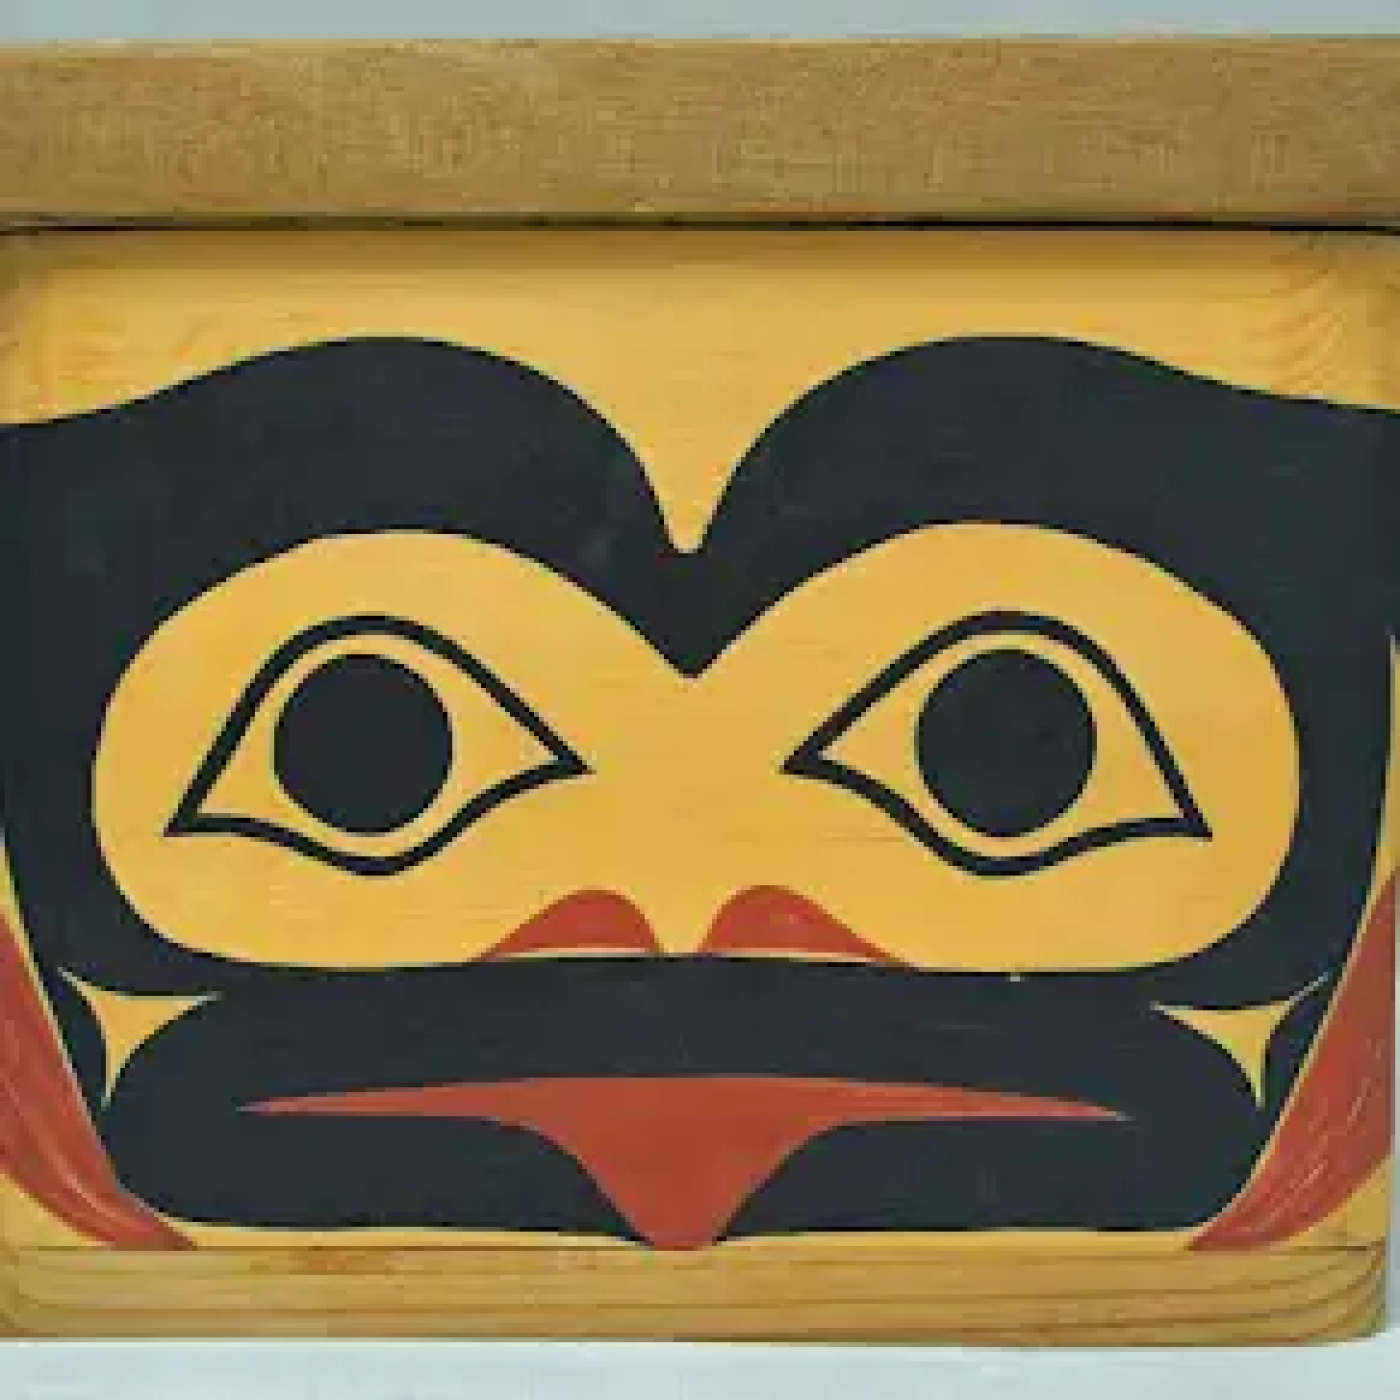 Bentwood Box (2004) by Tommy Joseph. From the BIA Museum collection.